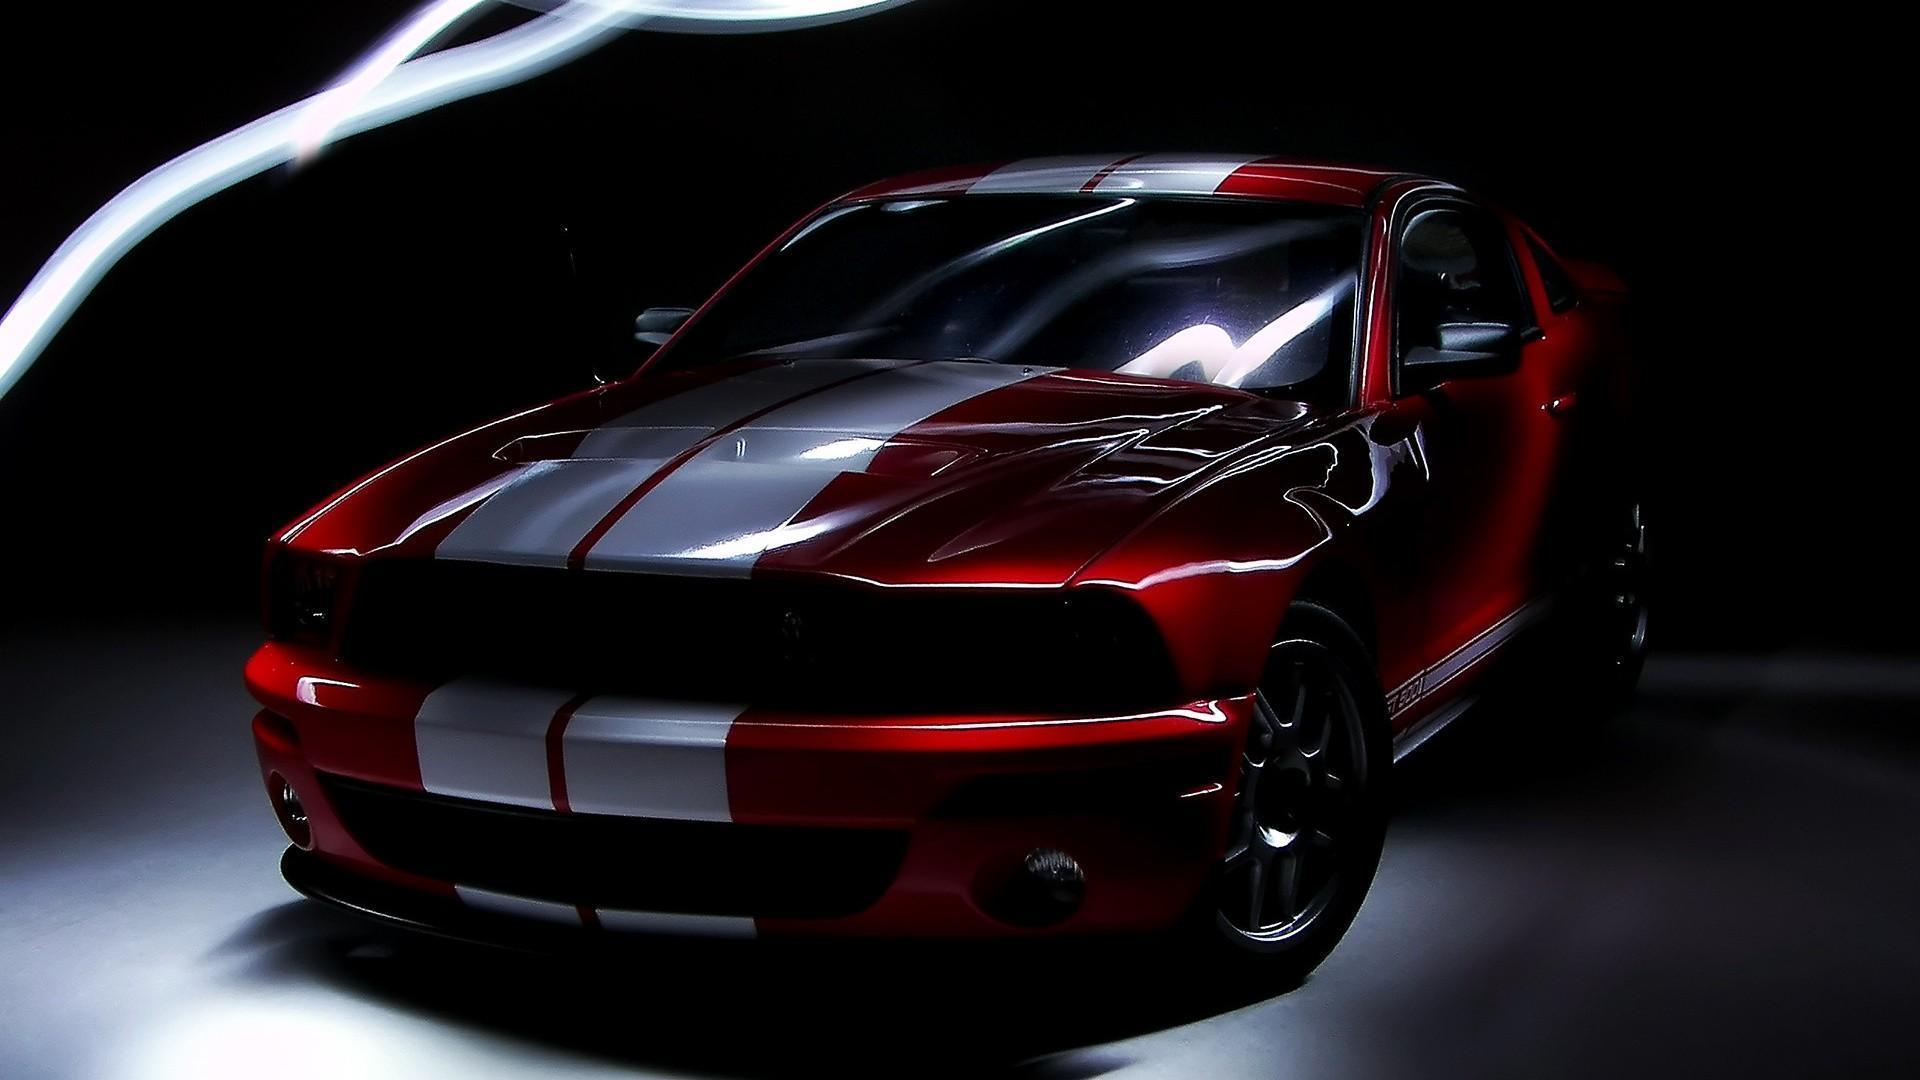 HD Ford Mustang Shelby GT500 2013 Wallpaper